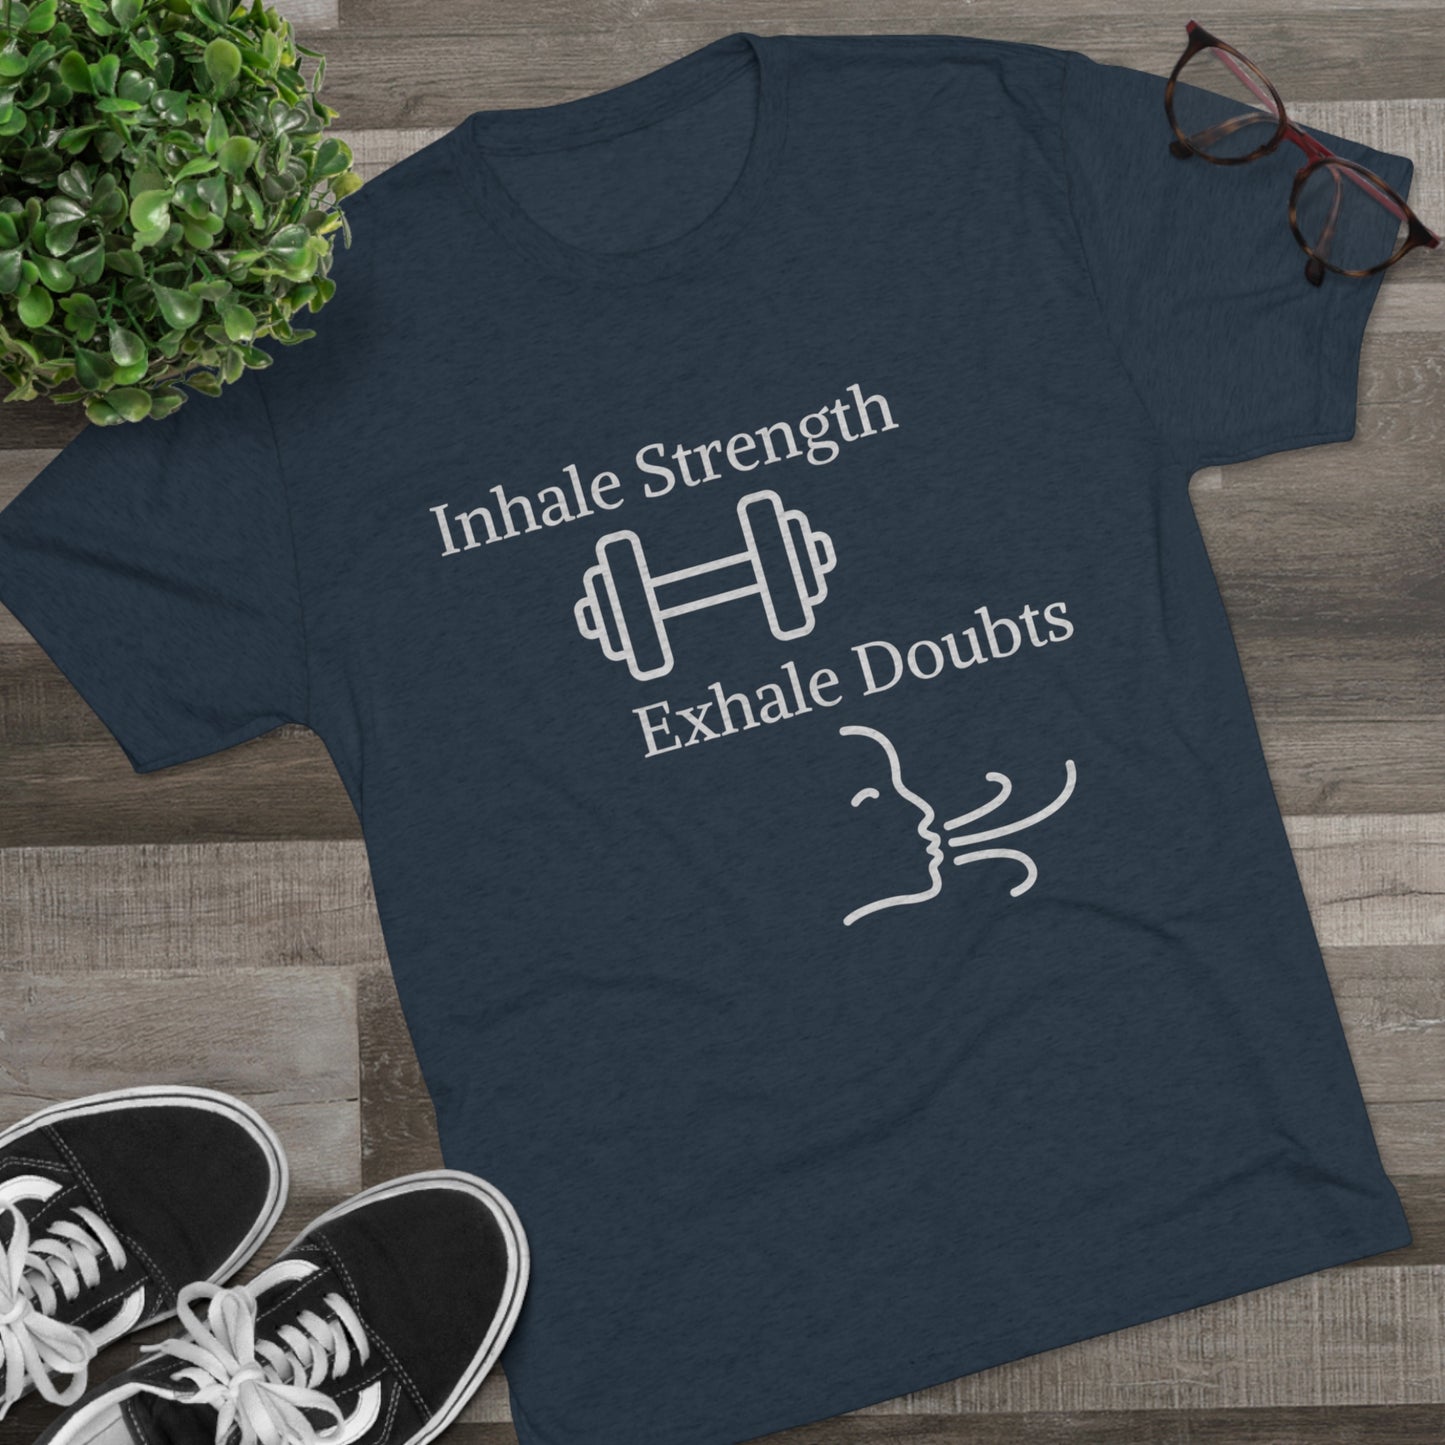 A motivational t-shirt in gray with the Inhale Strength Exhale Doubt w Images - Unisex Tri-Blend Crew Tee by Printify displayed on a wooden floor, accompanied by black sneakers and a pair of glasses.